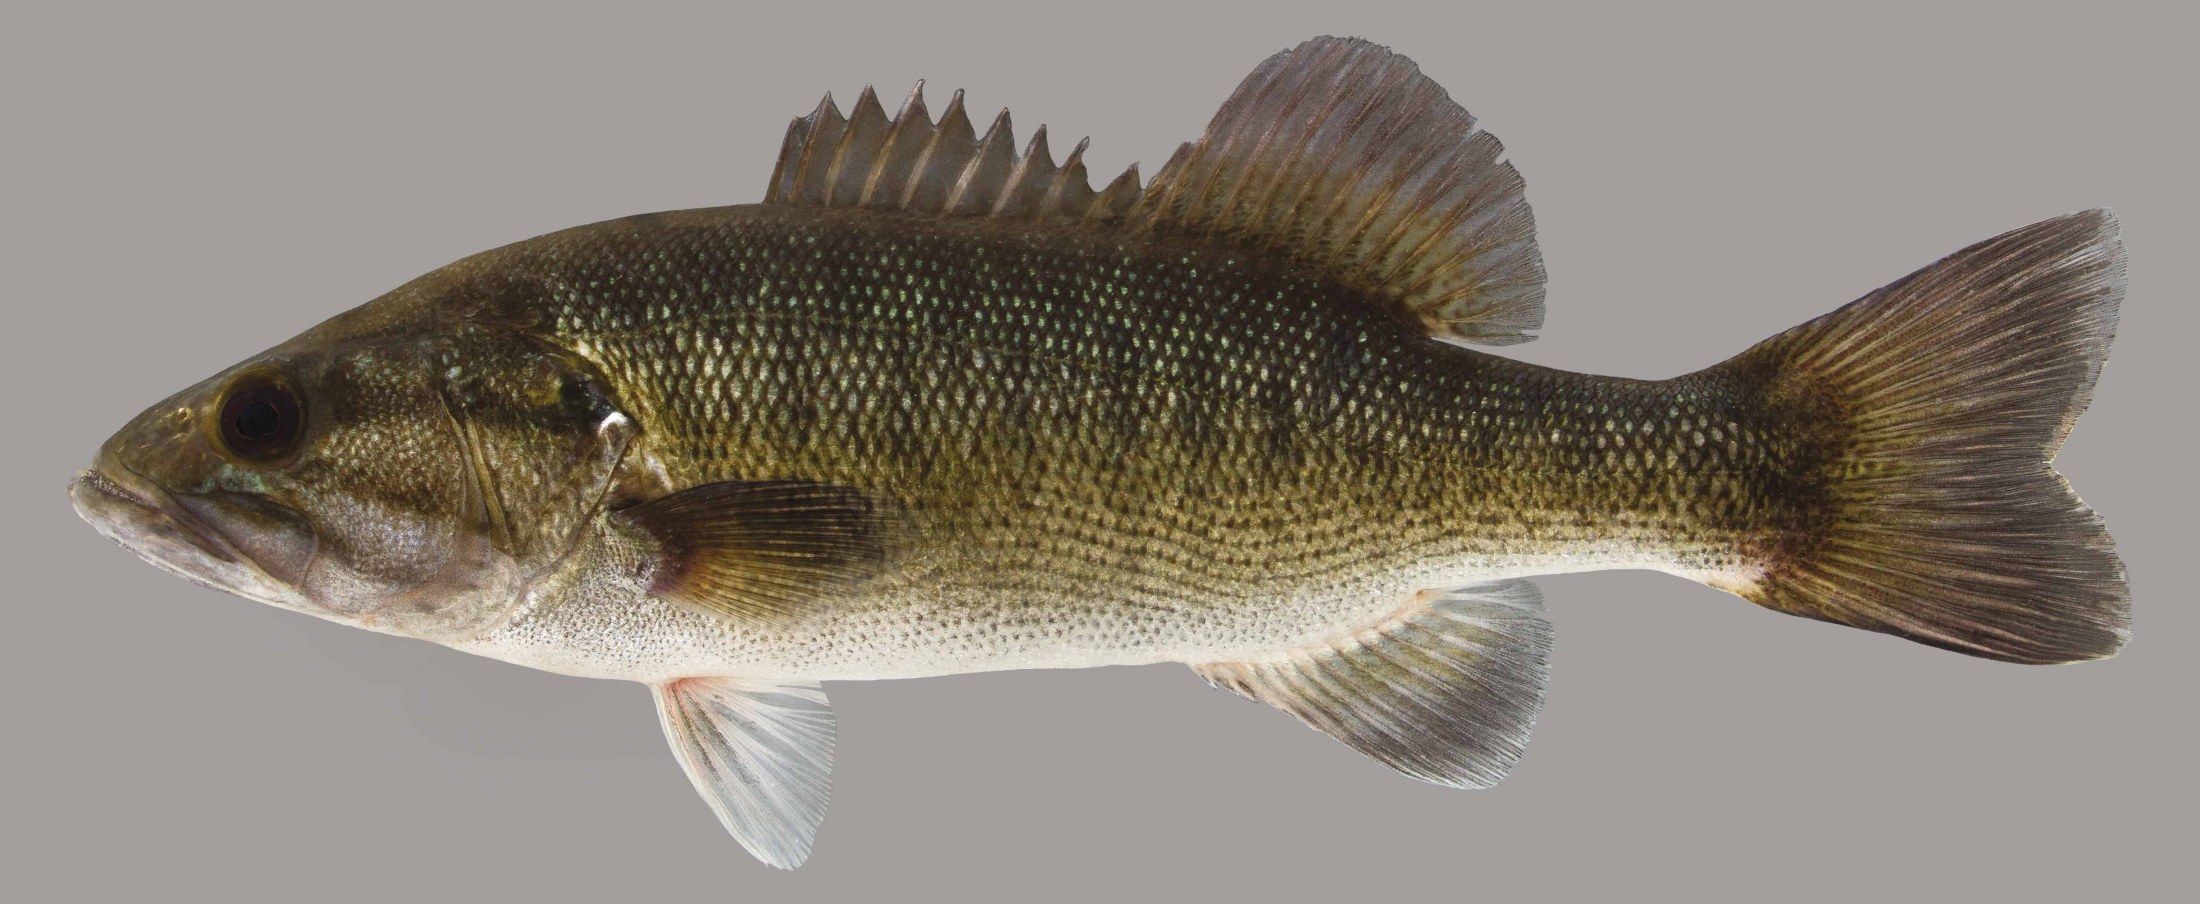 Lateral view of a shoal bass